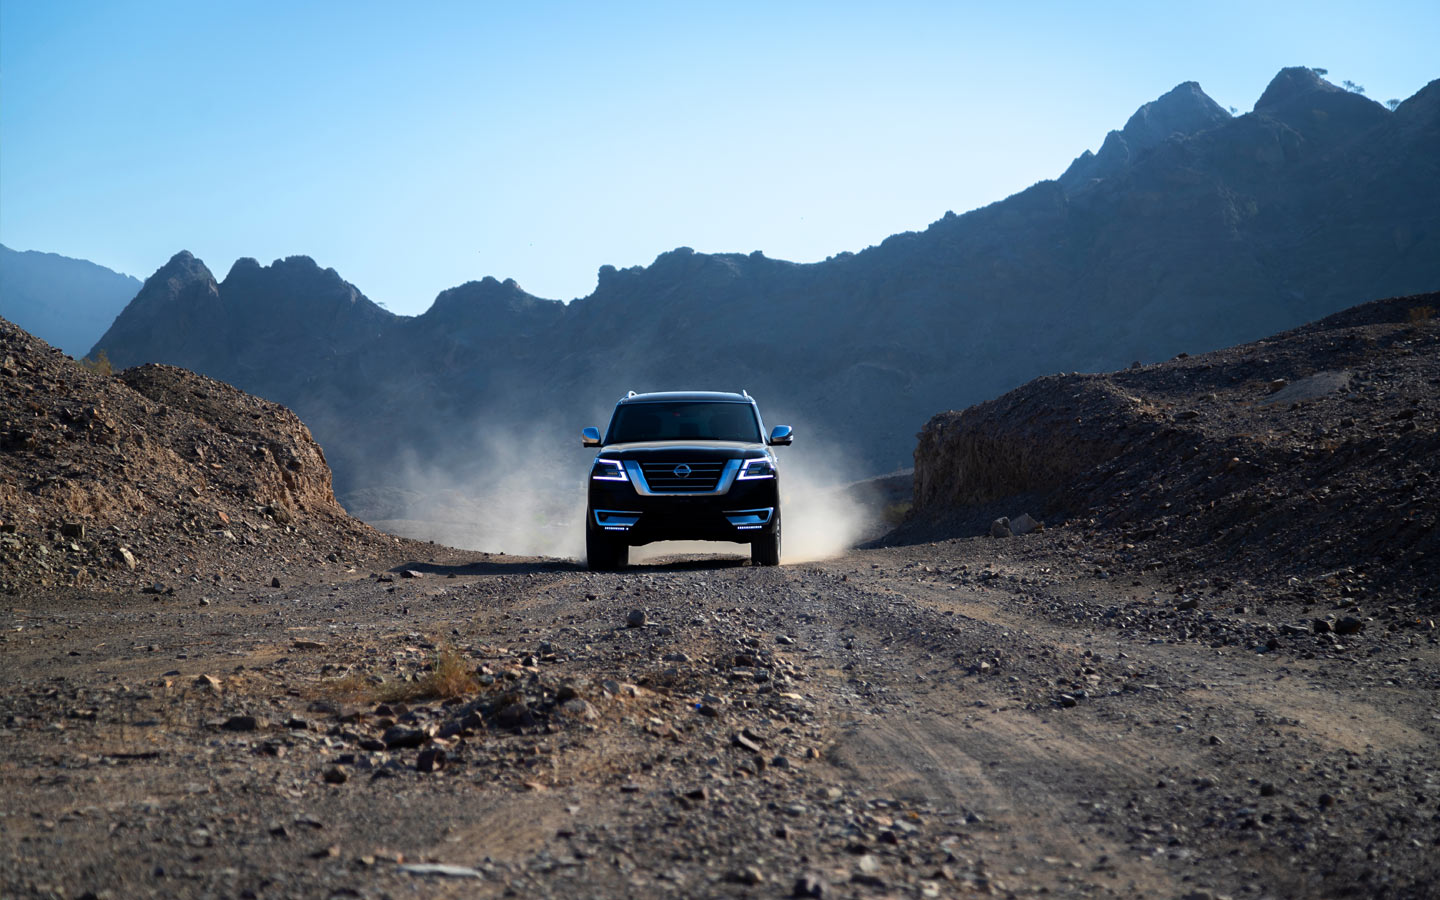 One of the top Tips for Safe Mountain Driving is to select an off-road vehicle